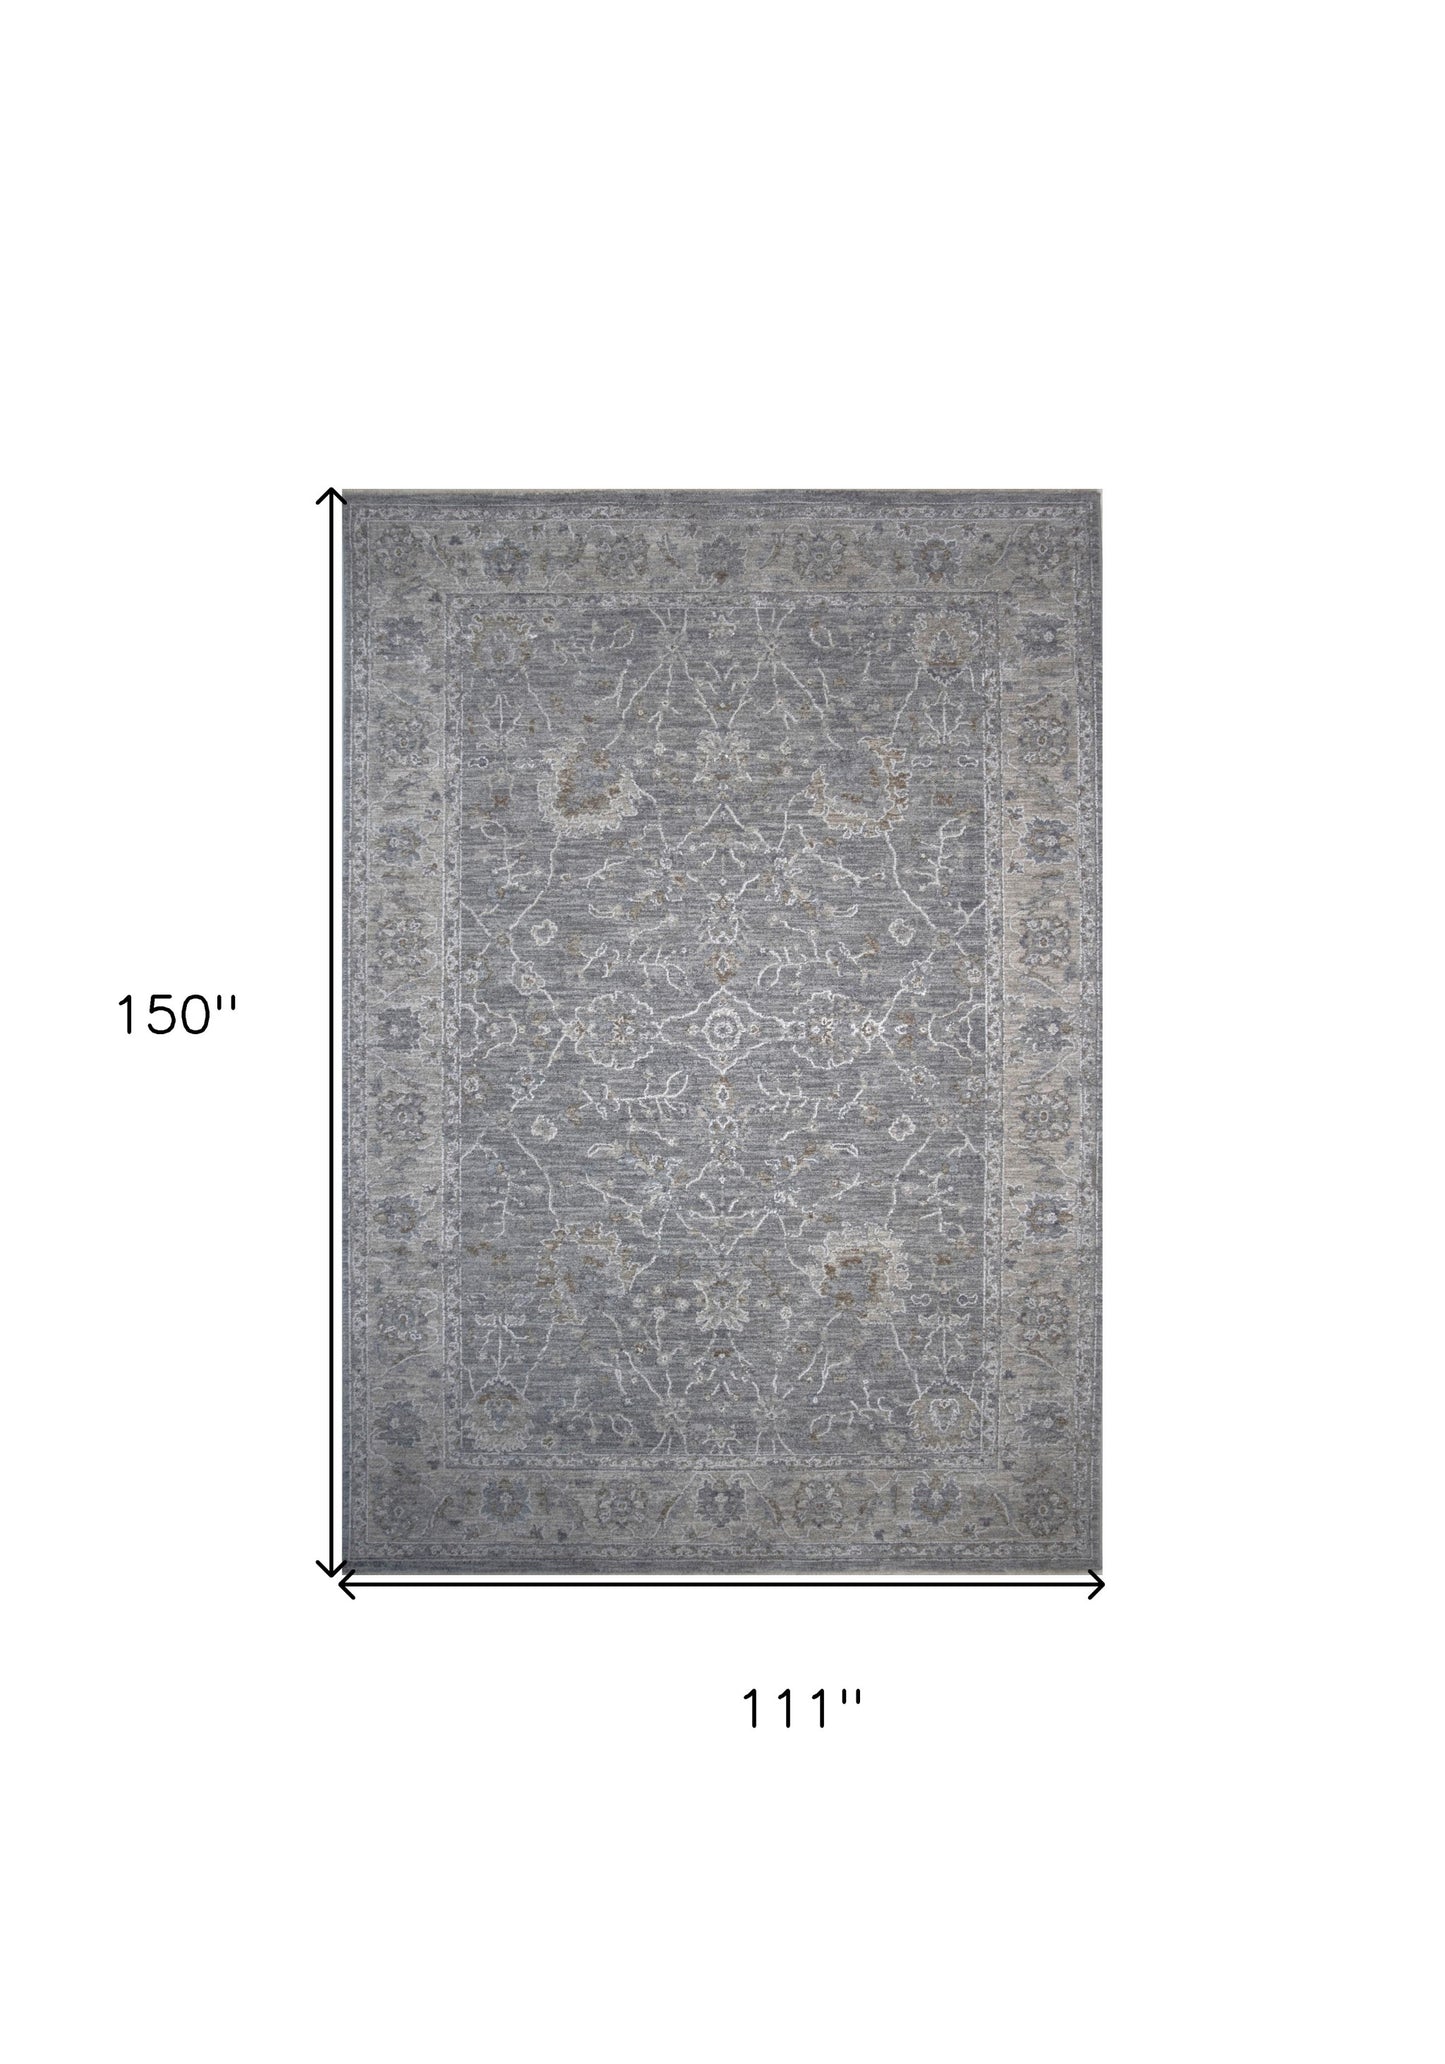 9' X 12' Blue Gray Southwestern Floral Stain Resistant Area Rug